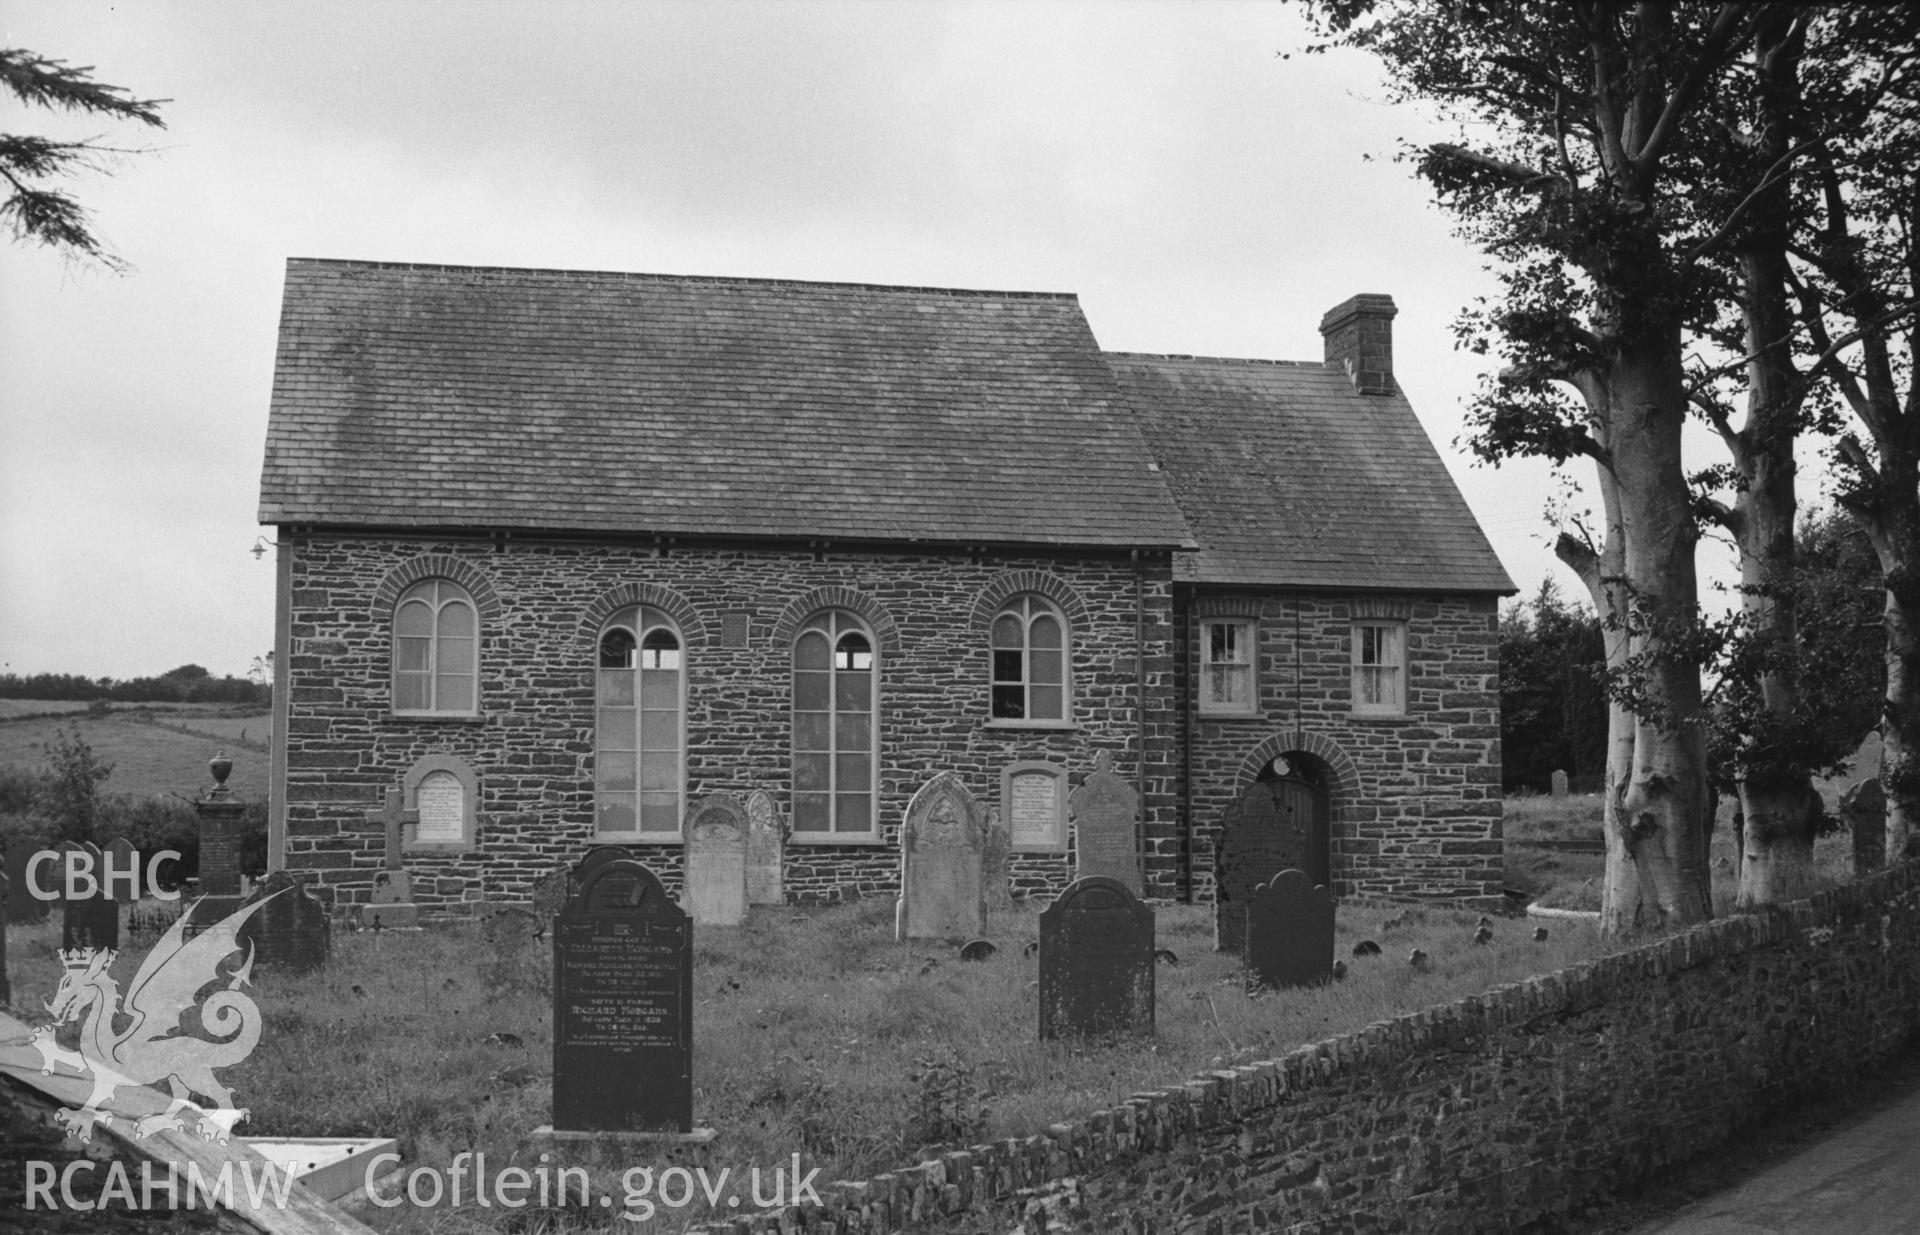 Digital copy of a black and white negative showing exterior view of Pen-Uwch Welsh Calvinistic Methodist chapel, west of Tregaron. Photographed by Arthur O. Chater in September 1964 from Grid Reference SN 5983 6225, looking west.